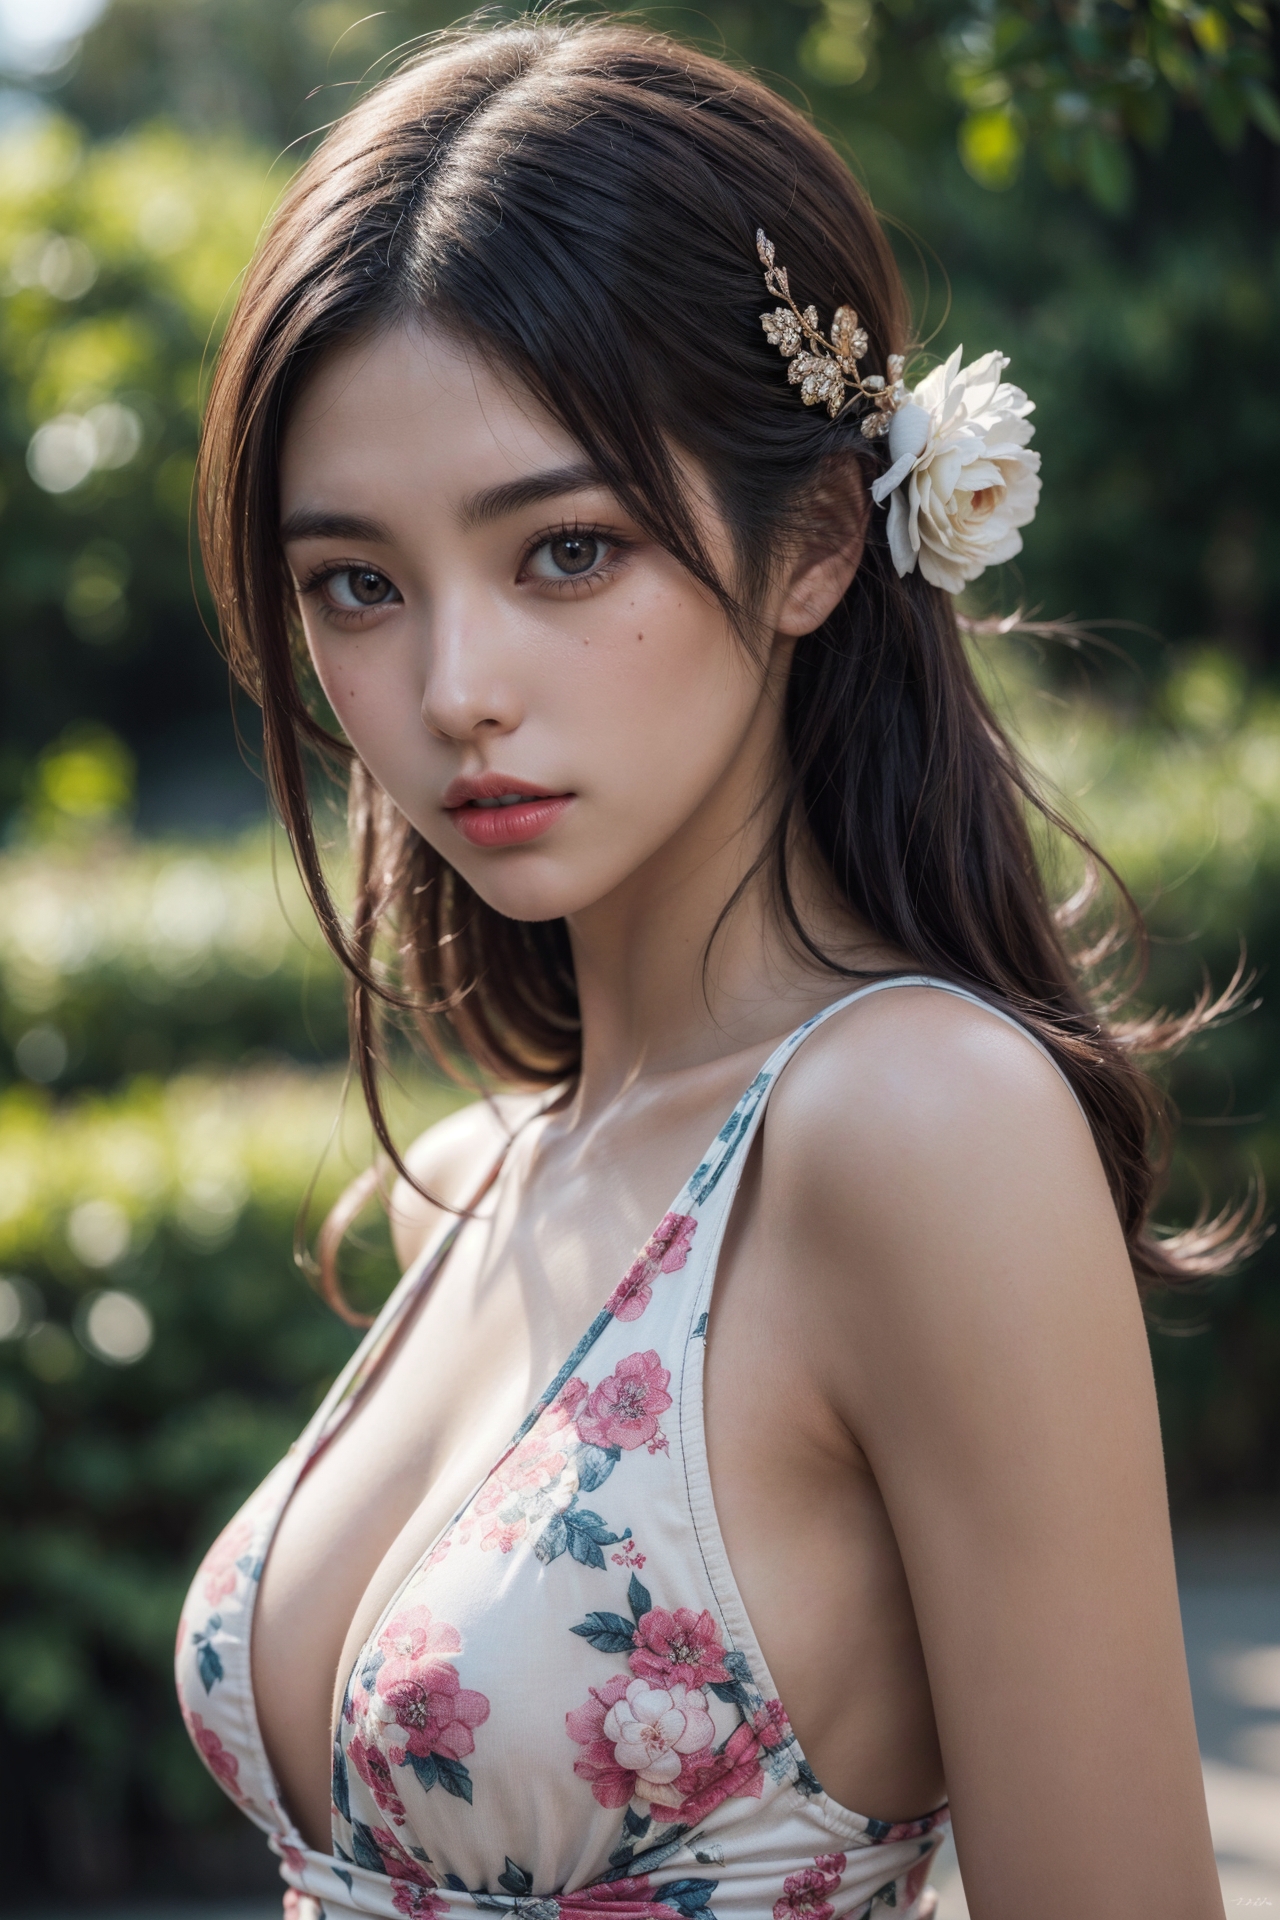 General 1280x1920 women brunette outdoors flower dress flowers looking at viewer Stable Diffusion AI art portrait portrait display blurred blurry background Asian long hair flower in hair digital art